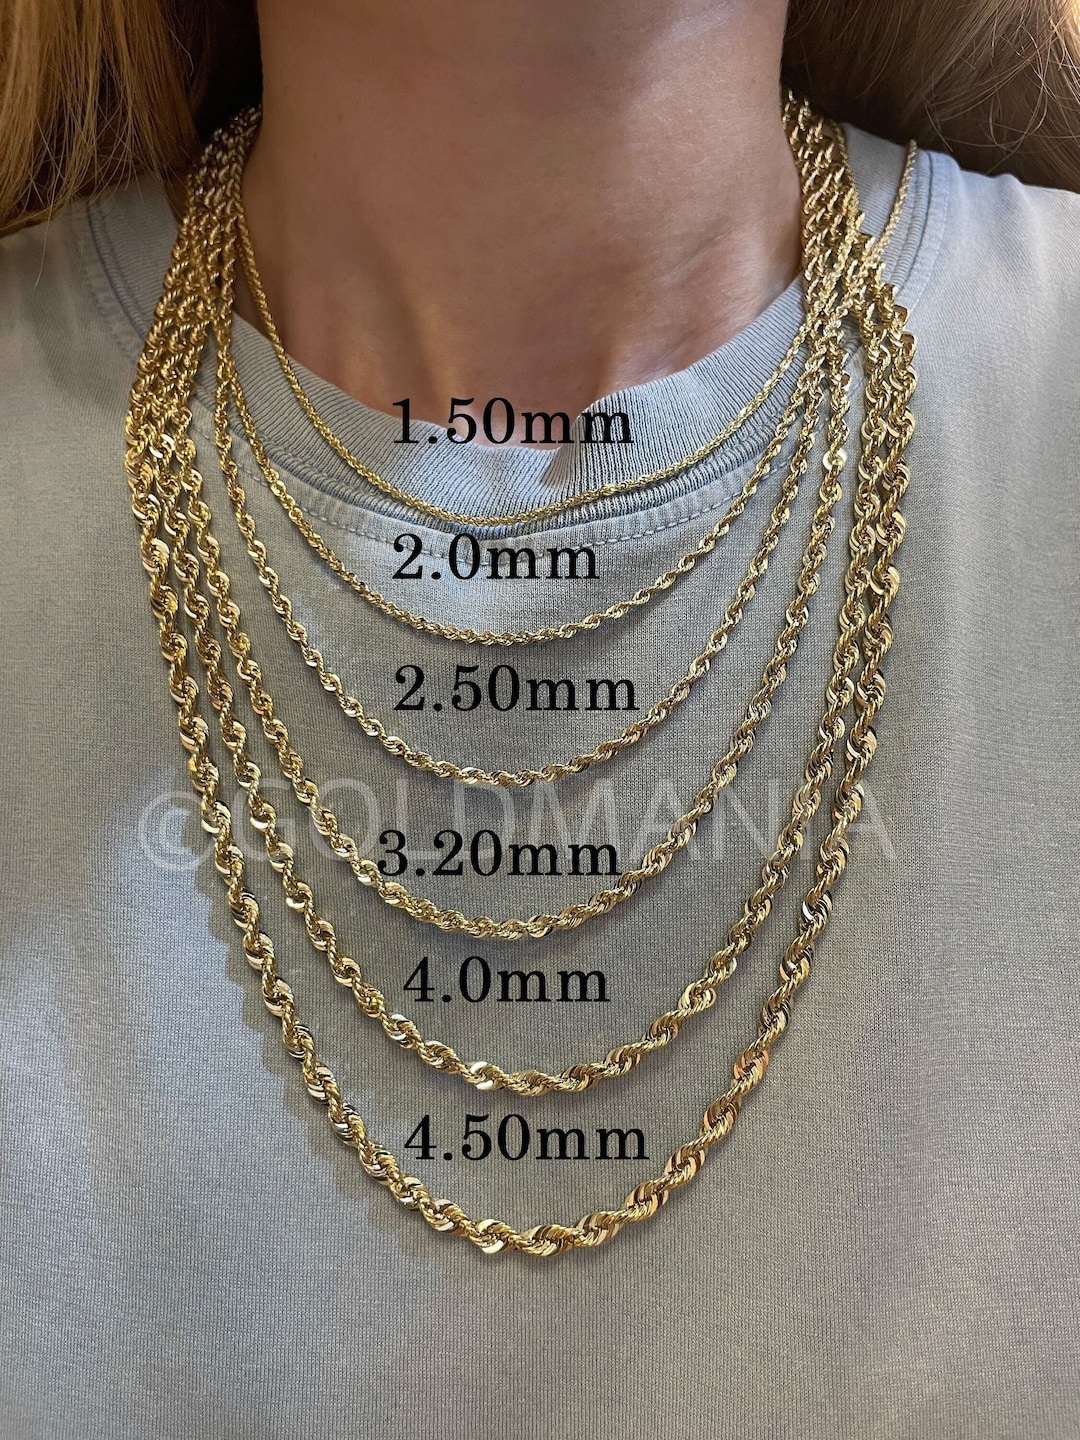 14K Gold Diamond Cut Rope Chain Necklace, 1.5mm 2mm 3.2mm 4mm 4.5mm Thick,  14 16 18 20 22 24 Inch, Real Gold Chain, Hollow Gold, Women 